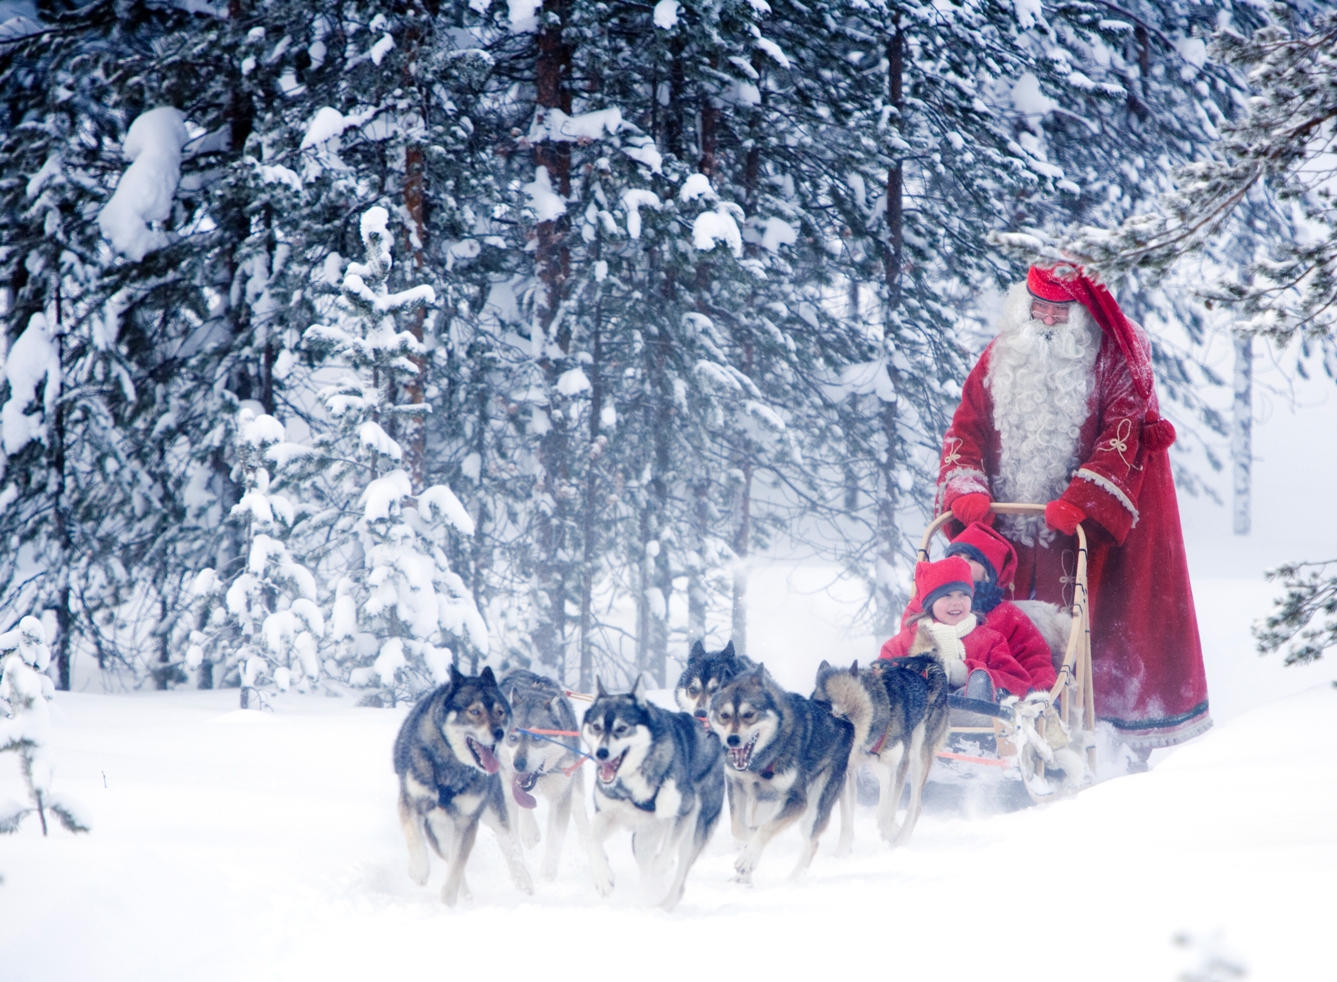 The ride of your life with Santa Claus and his husky dogs on a sleigh